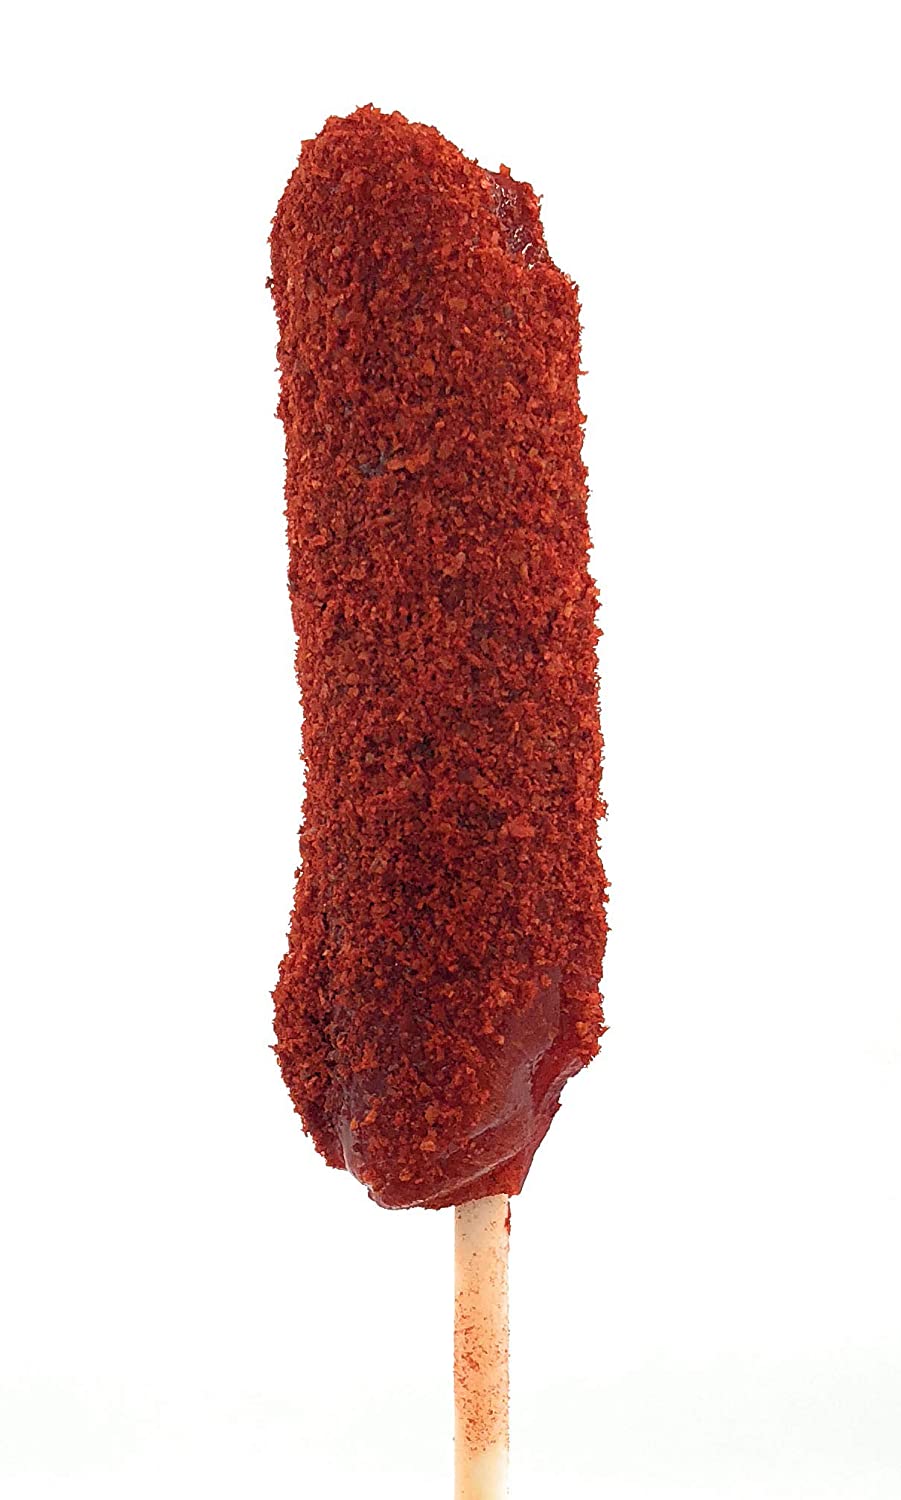 Takis lollipop - Sucette Takis Paleta Fuego Extra hot spicy challenge